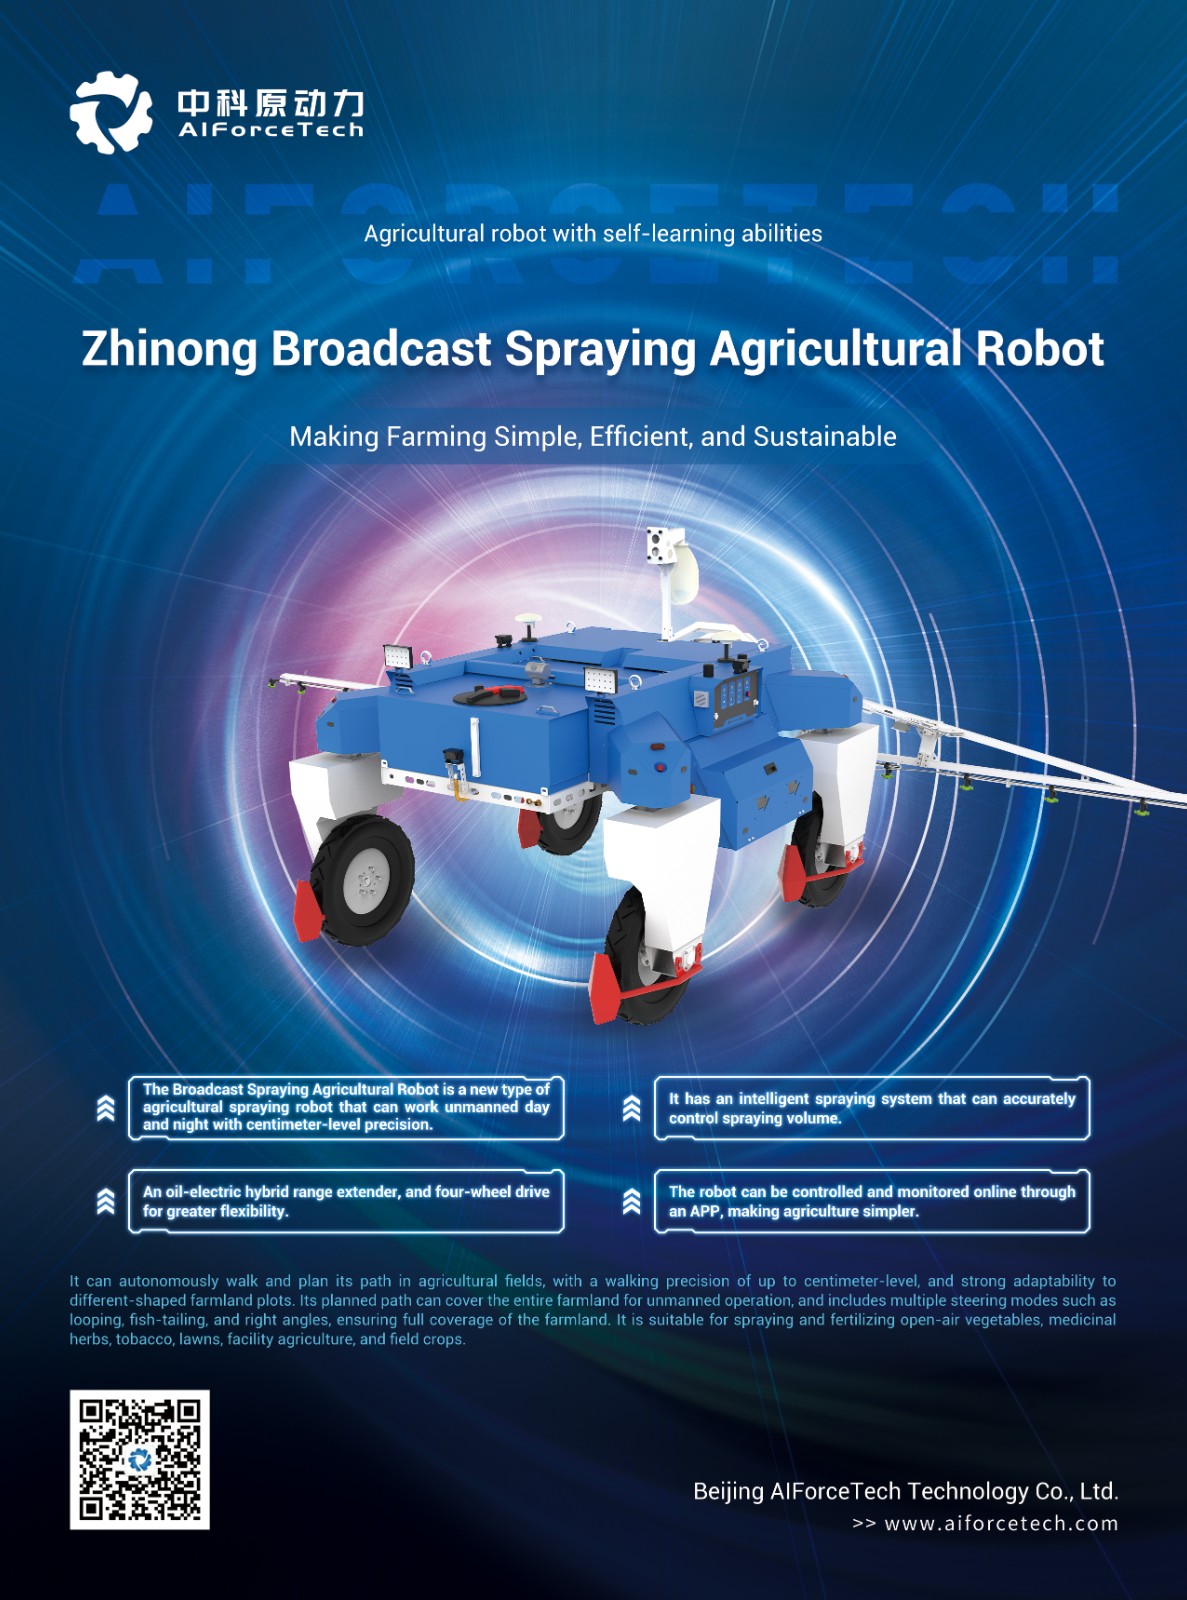 Zhinong Broadcast Spraying Agricultural Robot